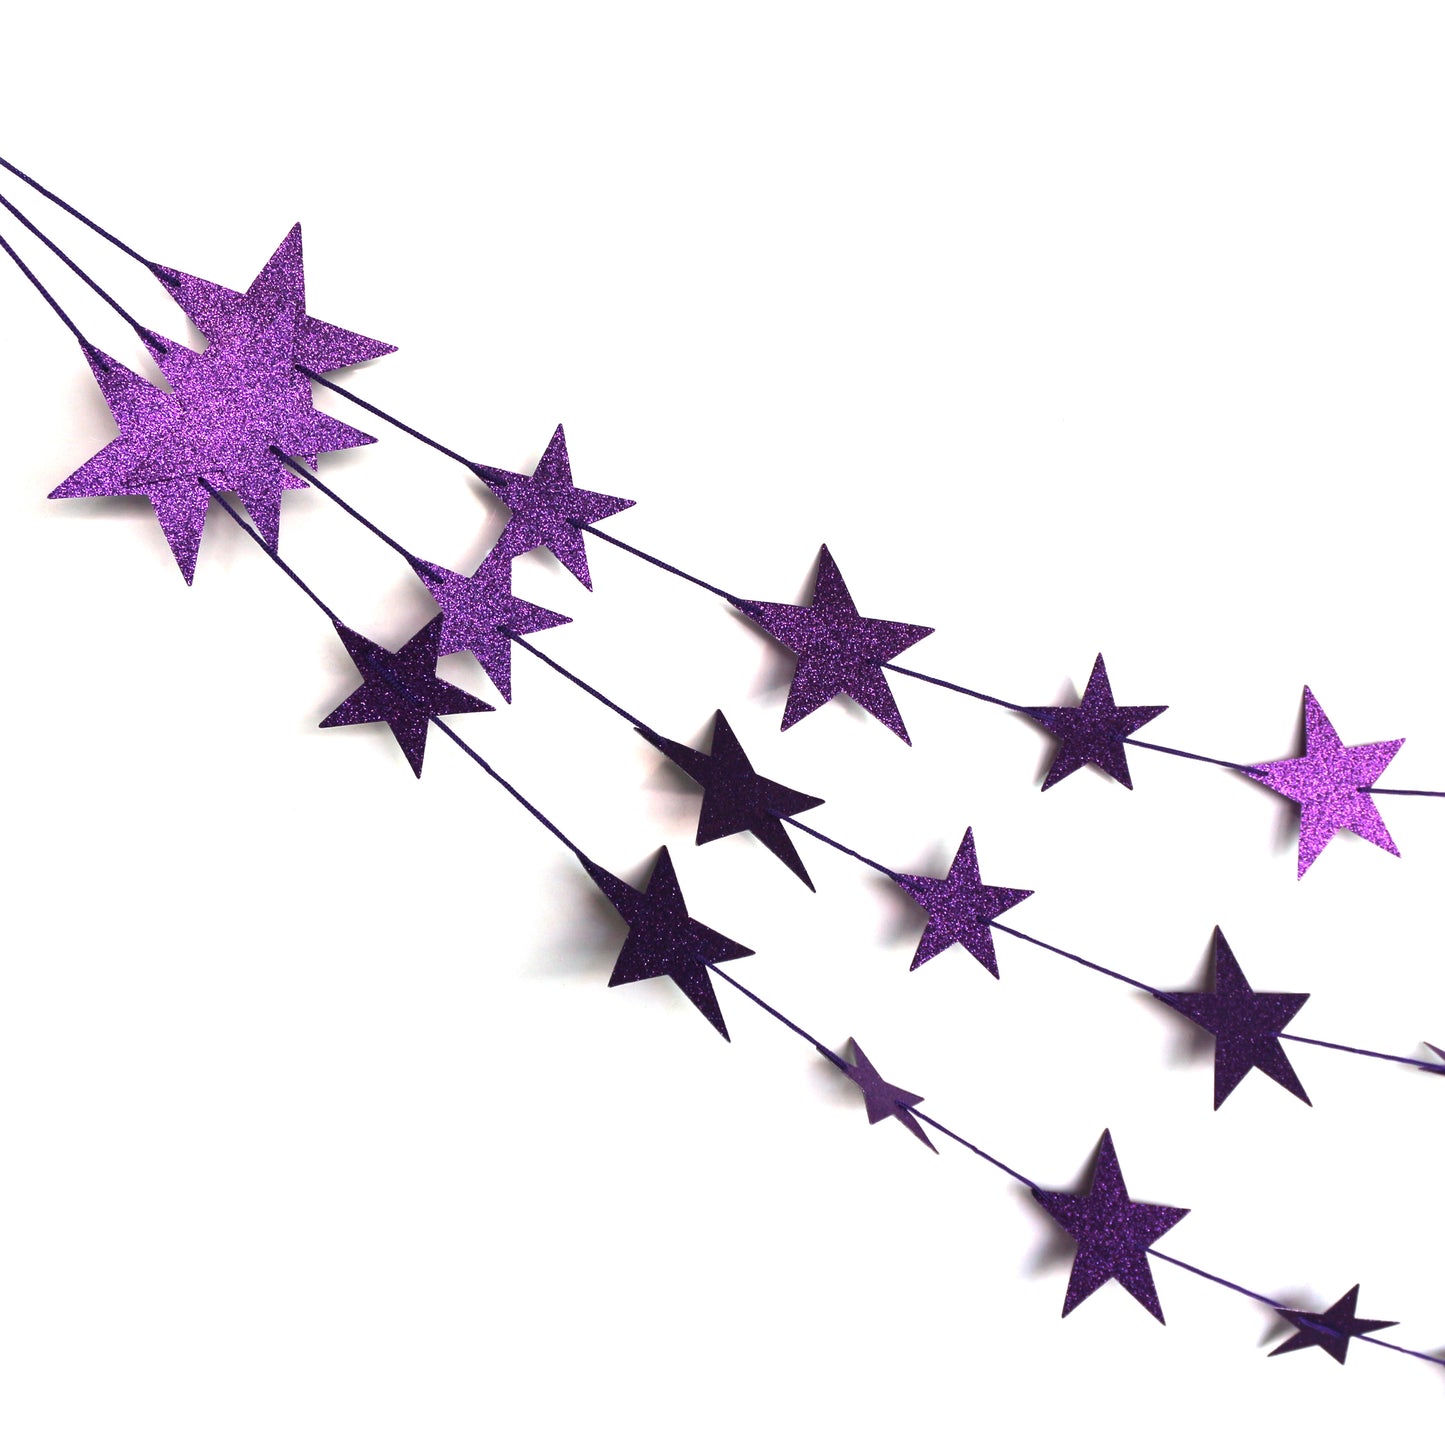 CVHOMEDECO. Twinkle Glittered Paper Star String Star Garland Unique Hanging Bunting Banner for Wedding Birthday Party Festival Home Background Decoration, 5.5 feet, Pack of 2 PCS (Purple)